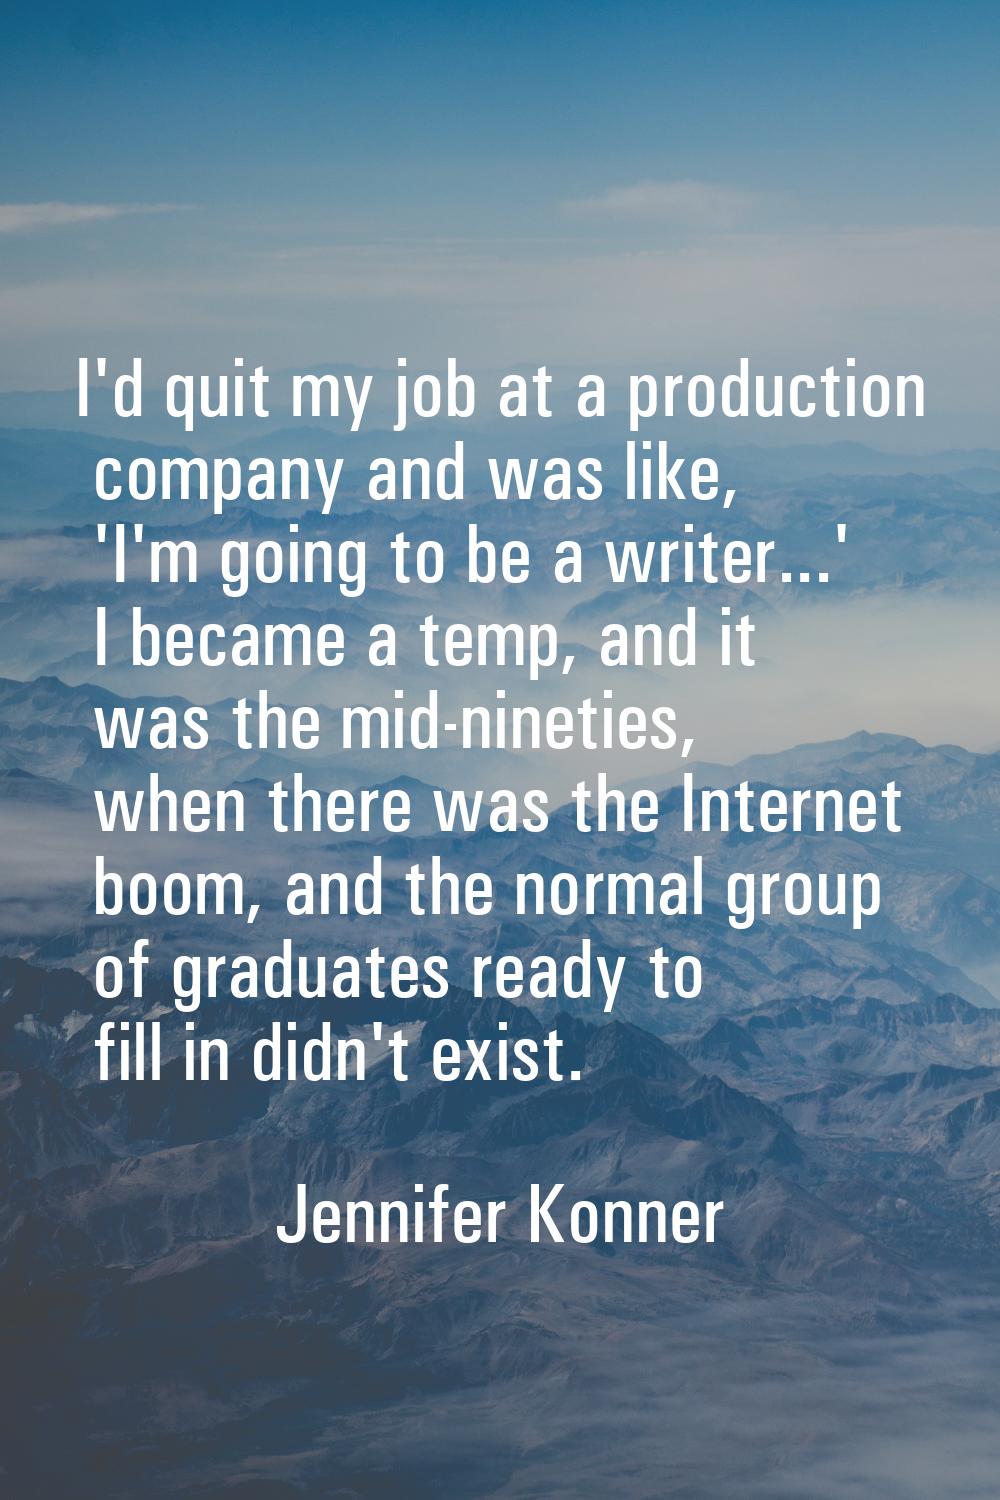 I'd quit my job at a production company and was like, 'I'm going to be a writer...' I became a temp